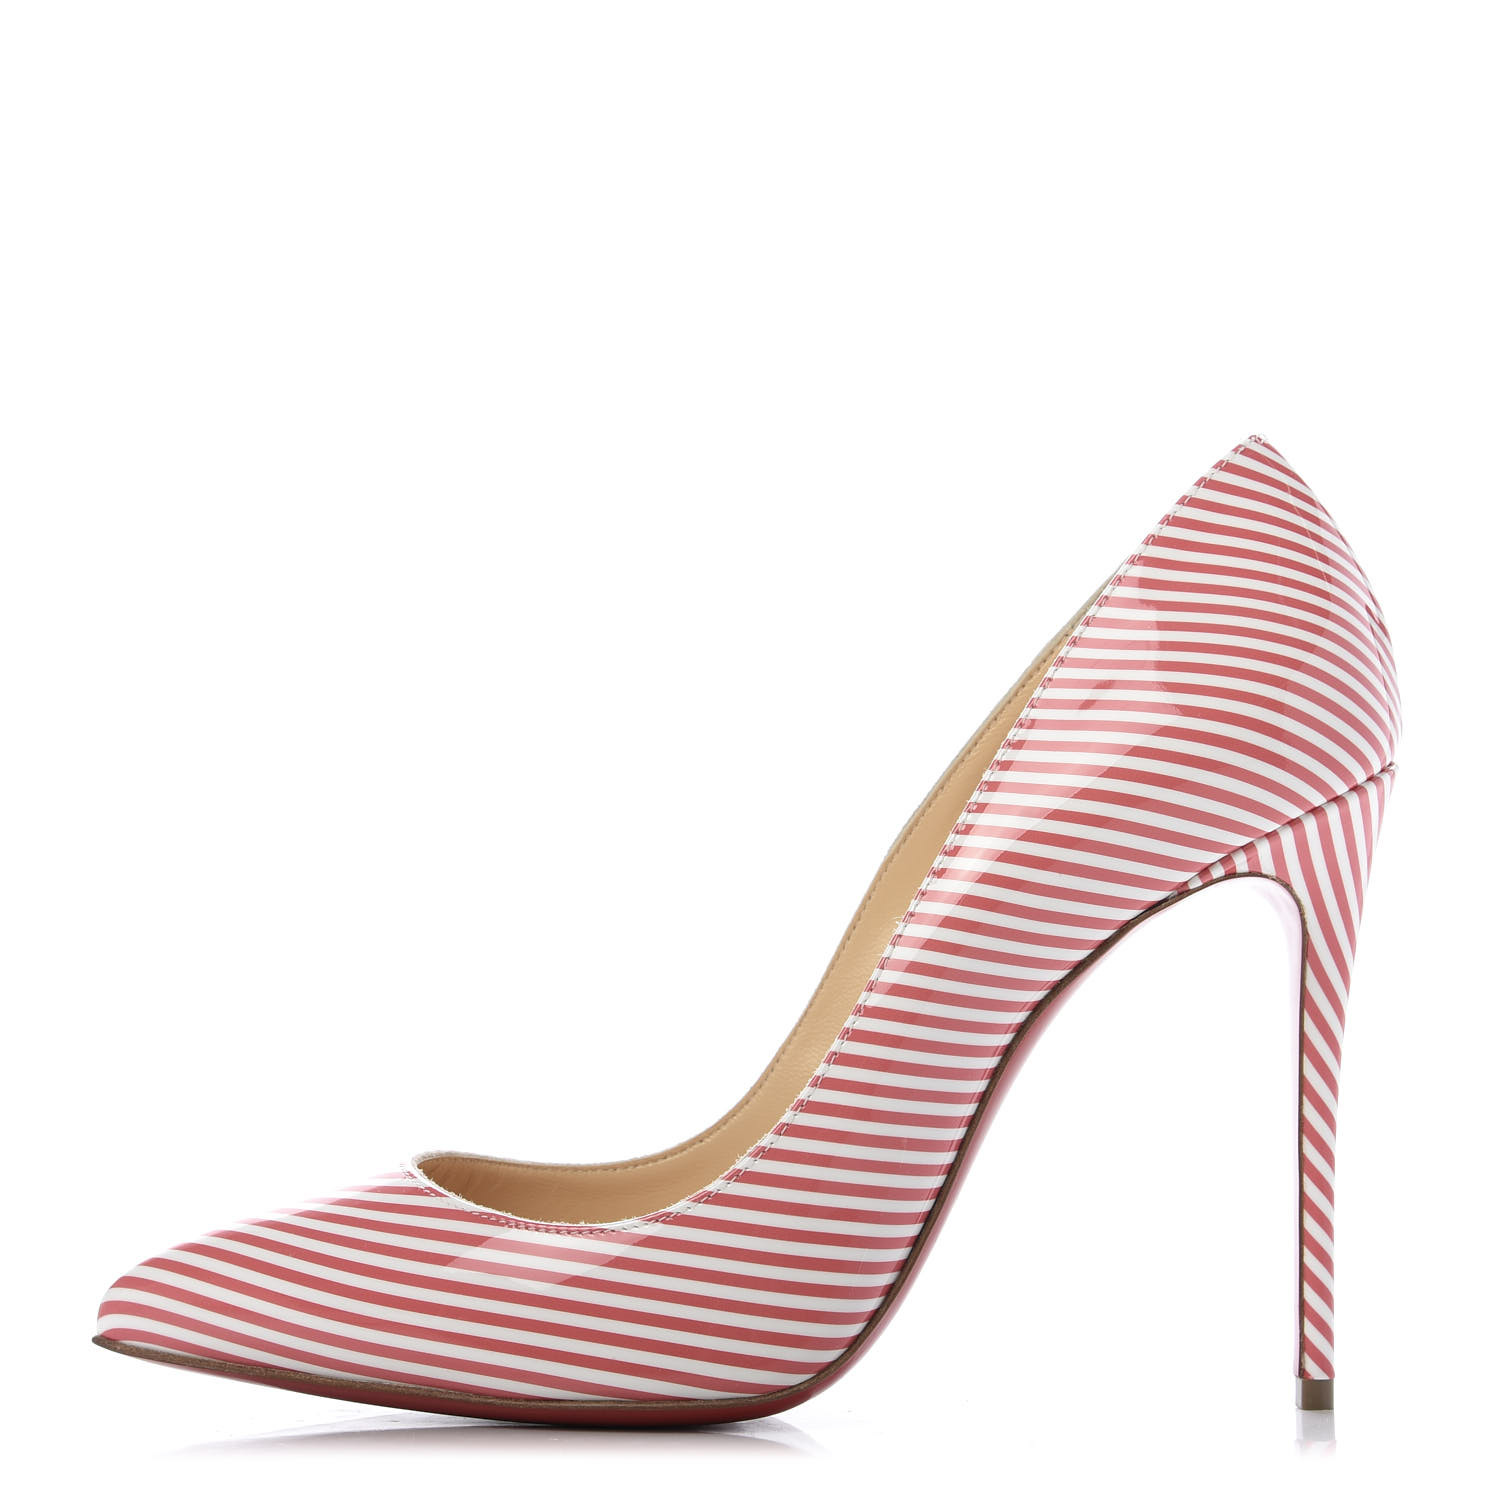 lotteri Fighter Vibrere CHRISTIAN LOUBOUTIN Patent Pigalle Follies Stripes 100 Pumps 38.5 Smoothie  White 667762 | FASHIONPHILE